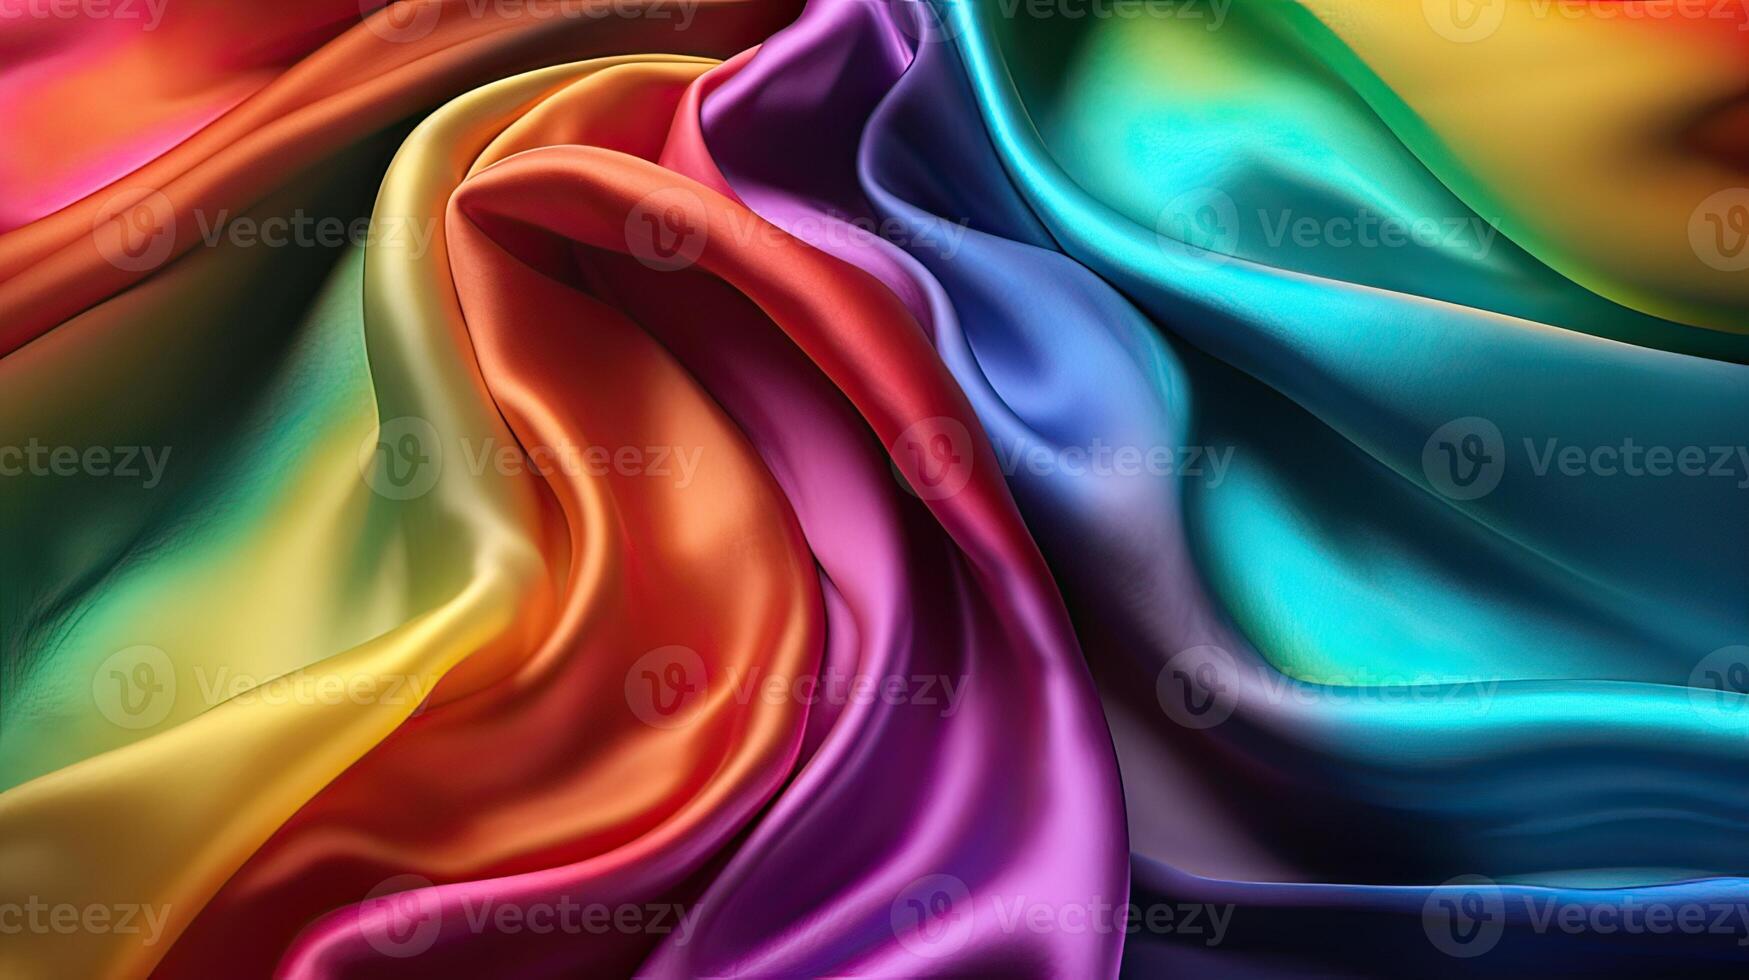 Texture, background, pattern. The texture of colorful silk fabric. Beautiful emerald colorful soft silk fabric. photo